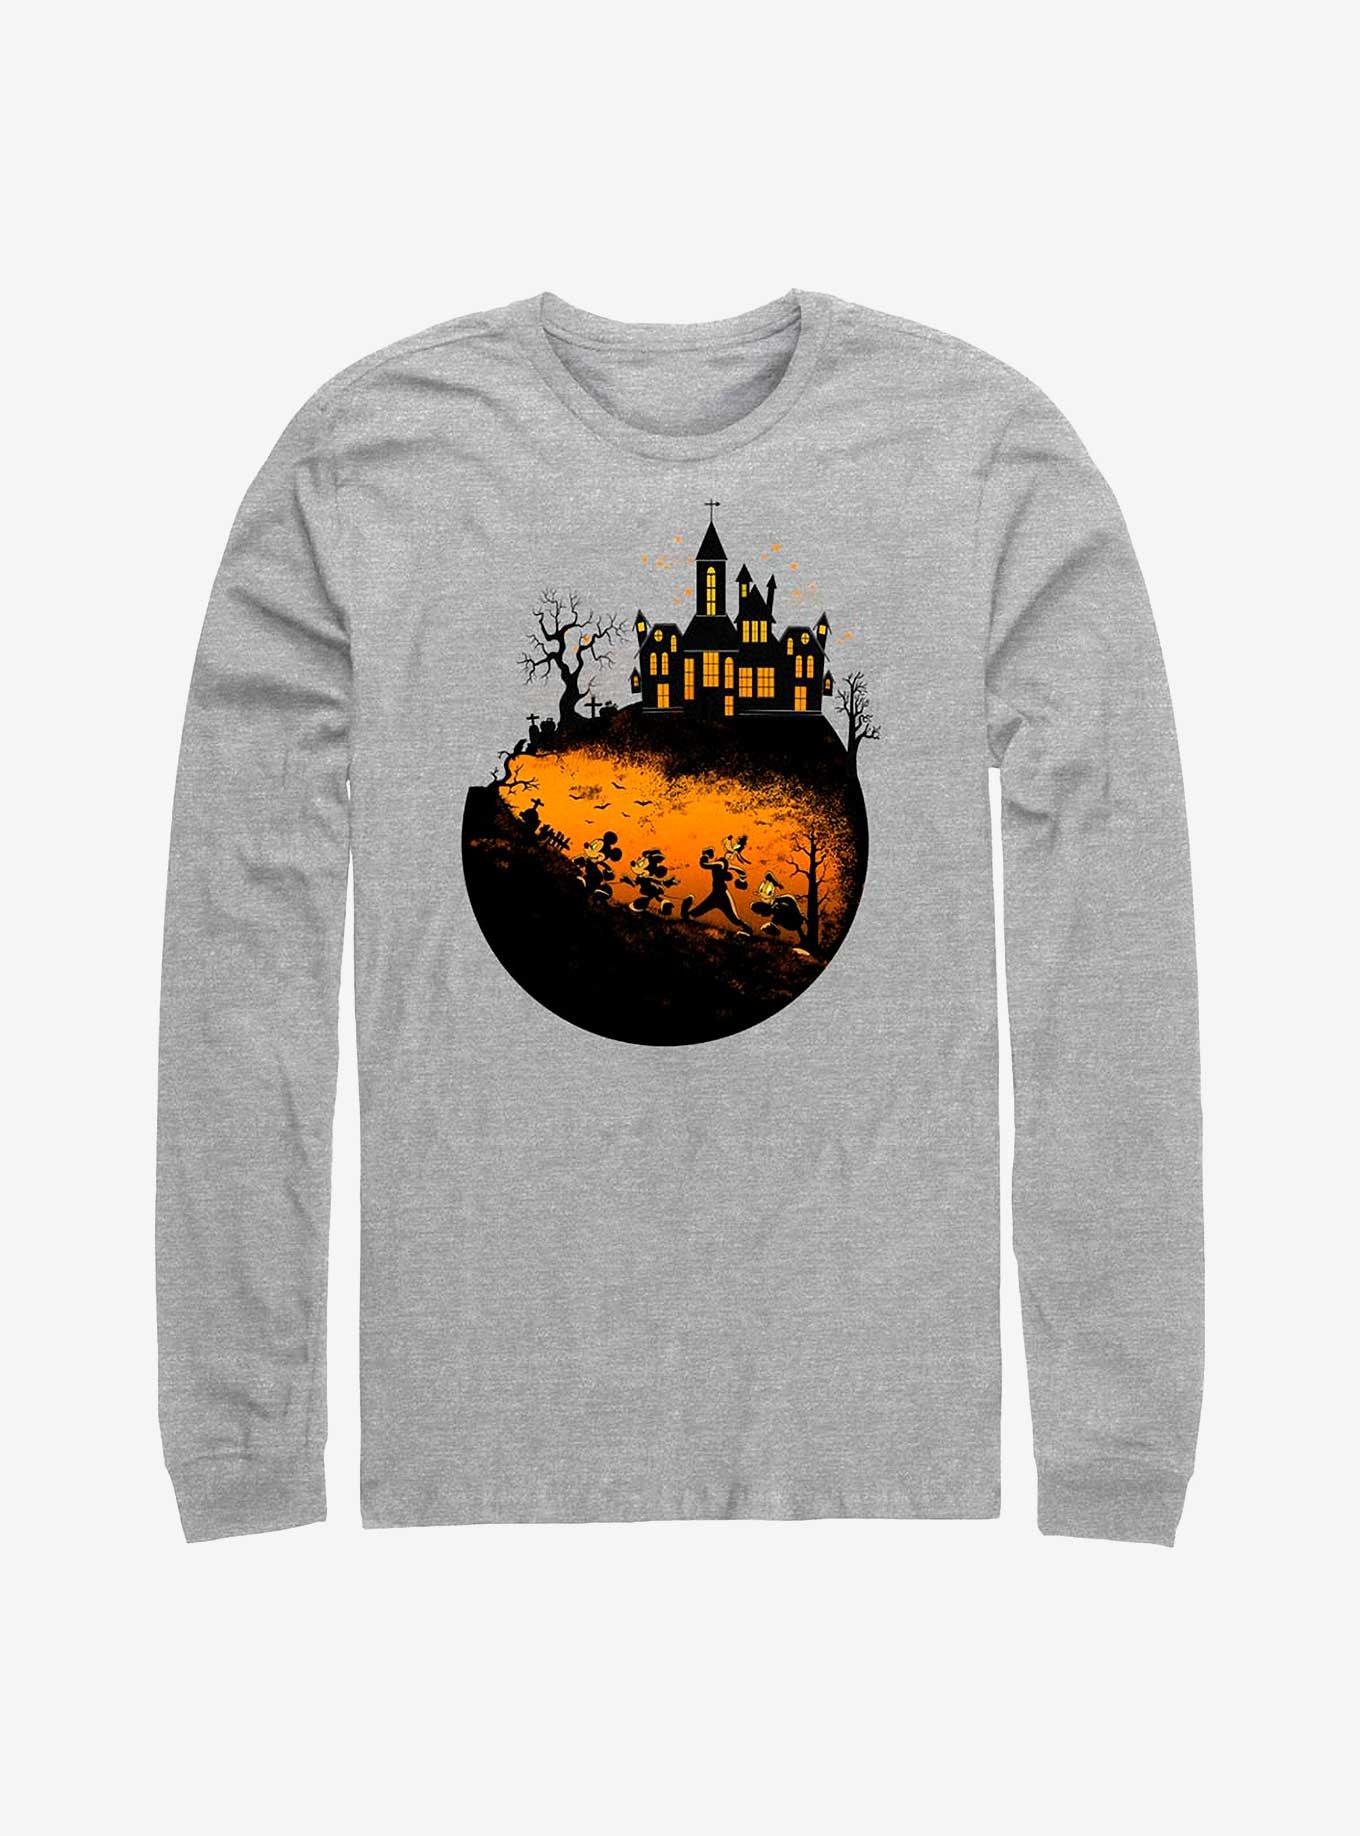 Disney Mickey Mouse Haunted Halloween Long-Sleeve T-Shirt, ATH HTR, hi-res